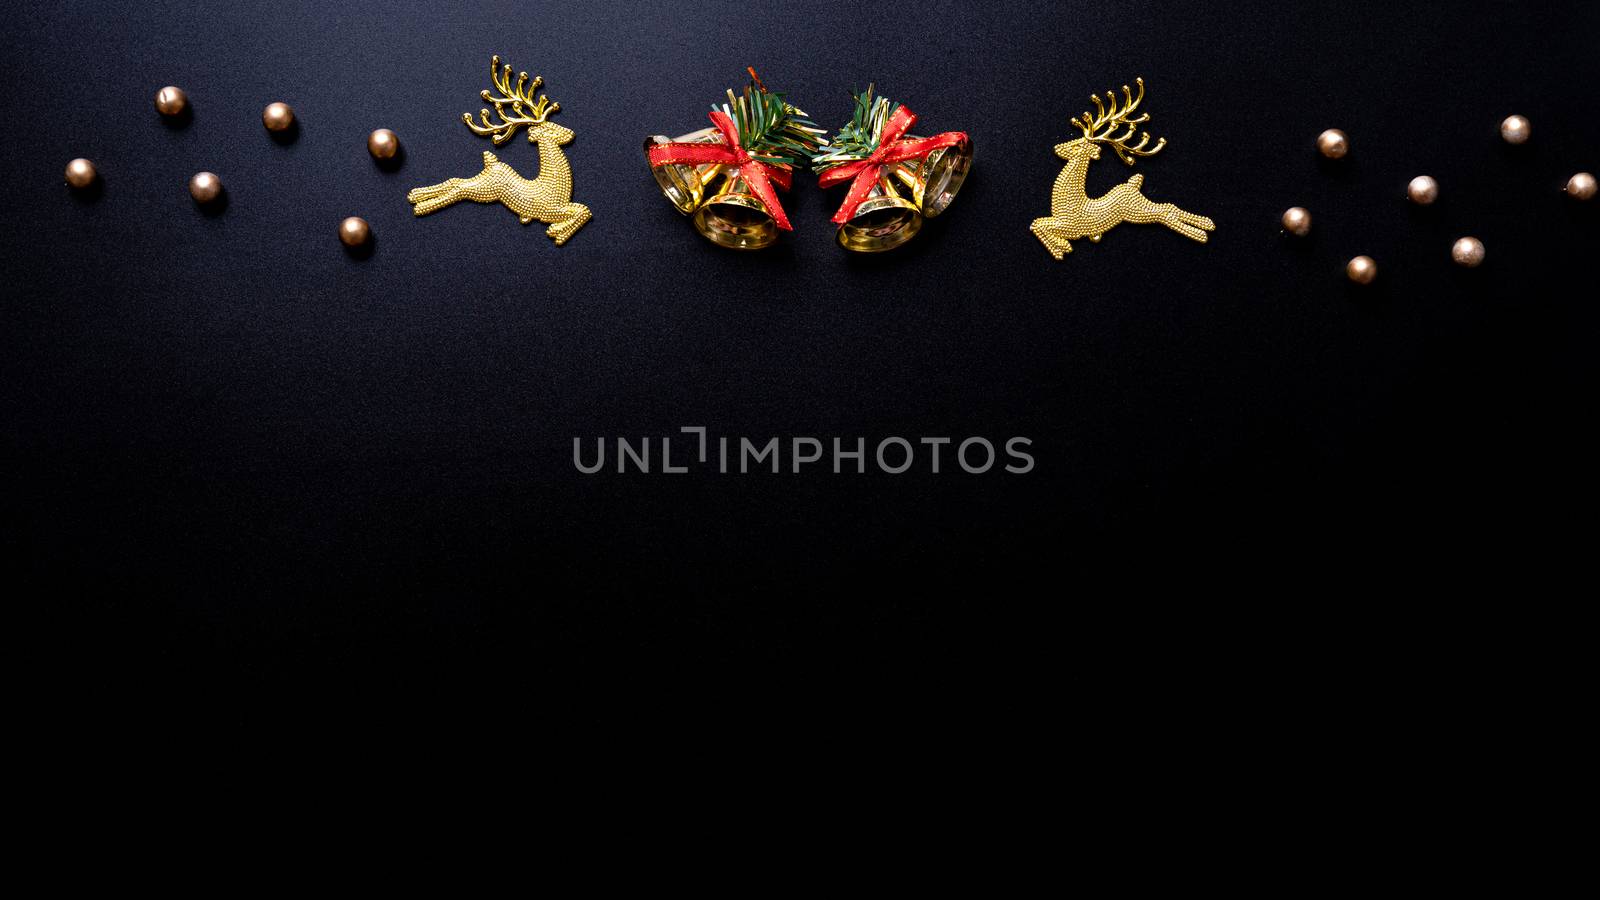 Christmas background. Top view of Christmas decorations on black background with copy space for text. Flat lay, winter, postcard template, new year concept.